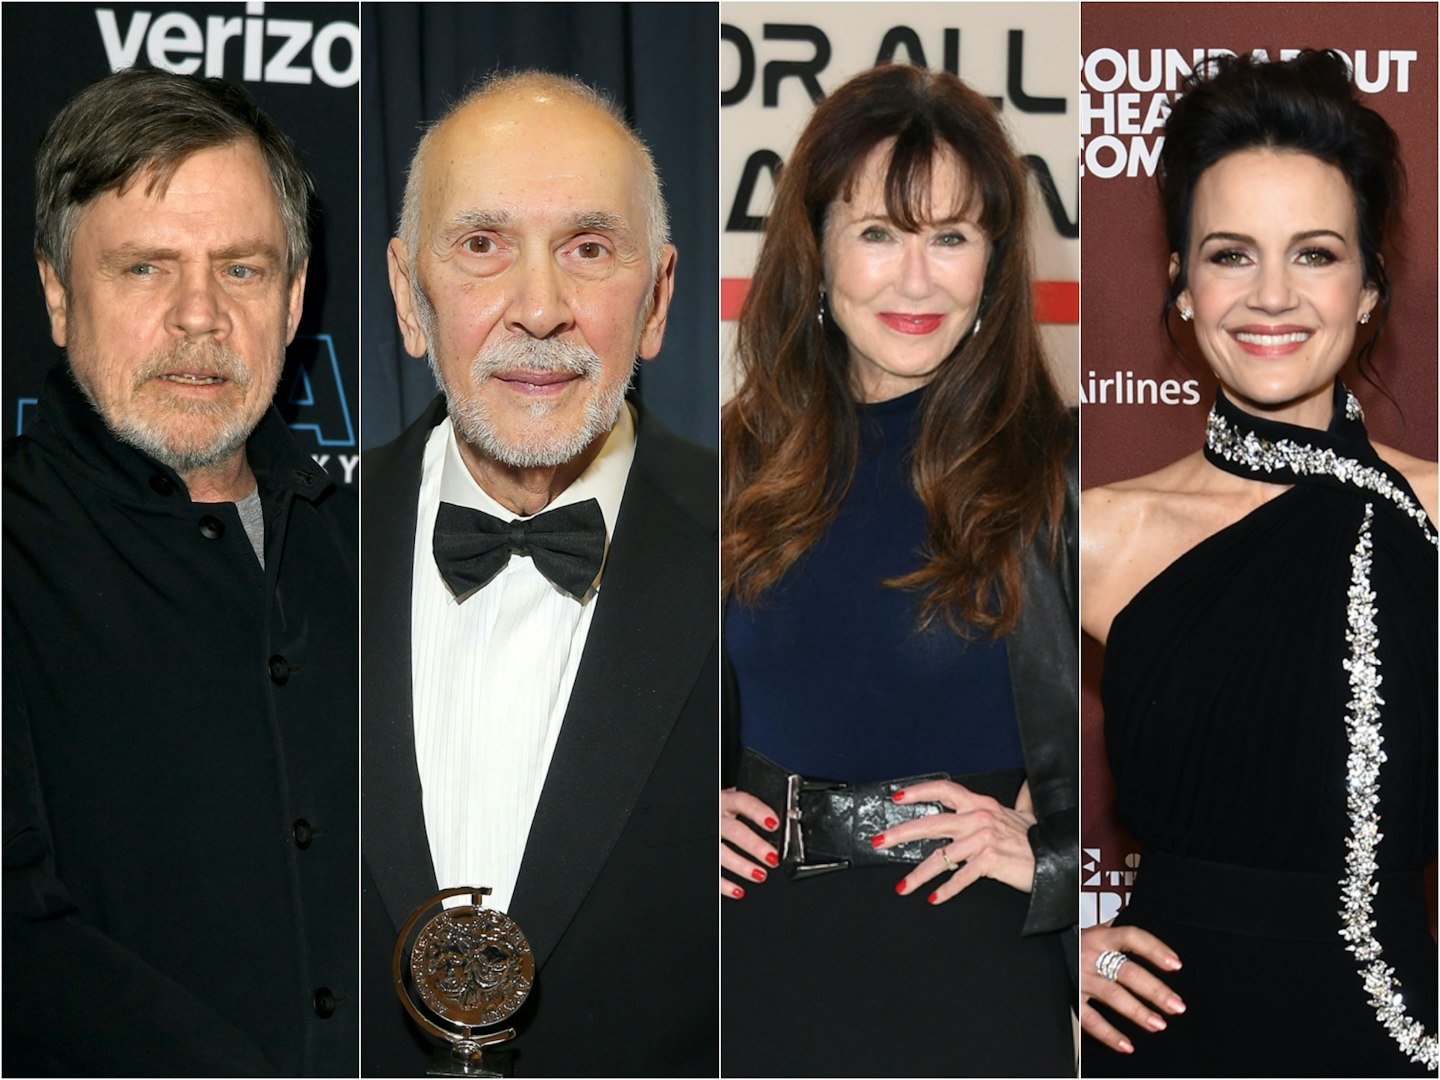 The Fall of the House of Usher: Mark Hamill, Carla Gugino, & more